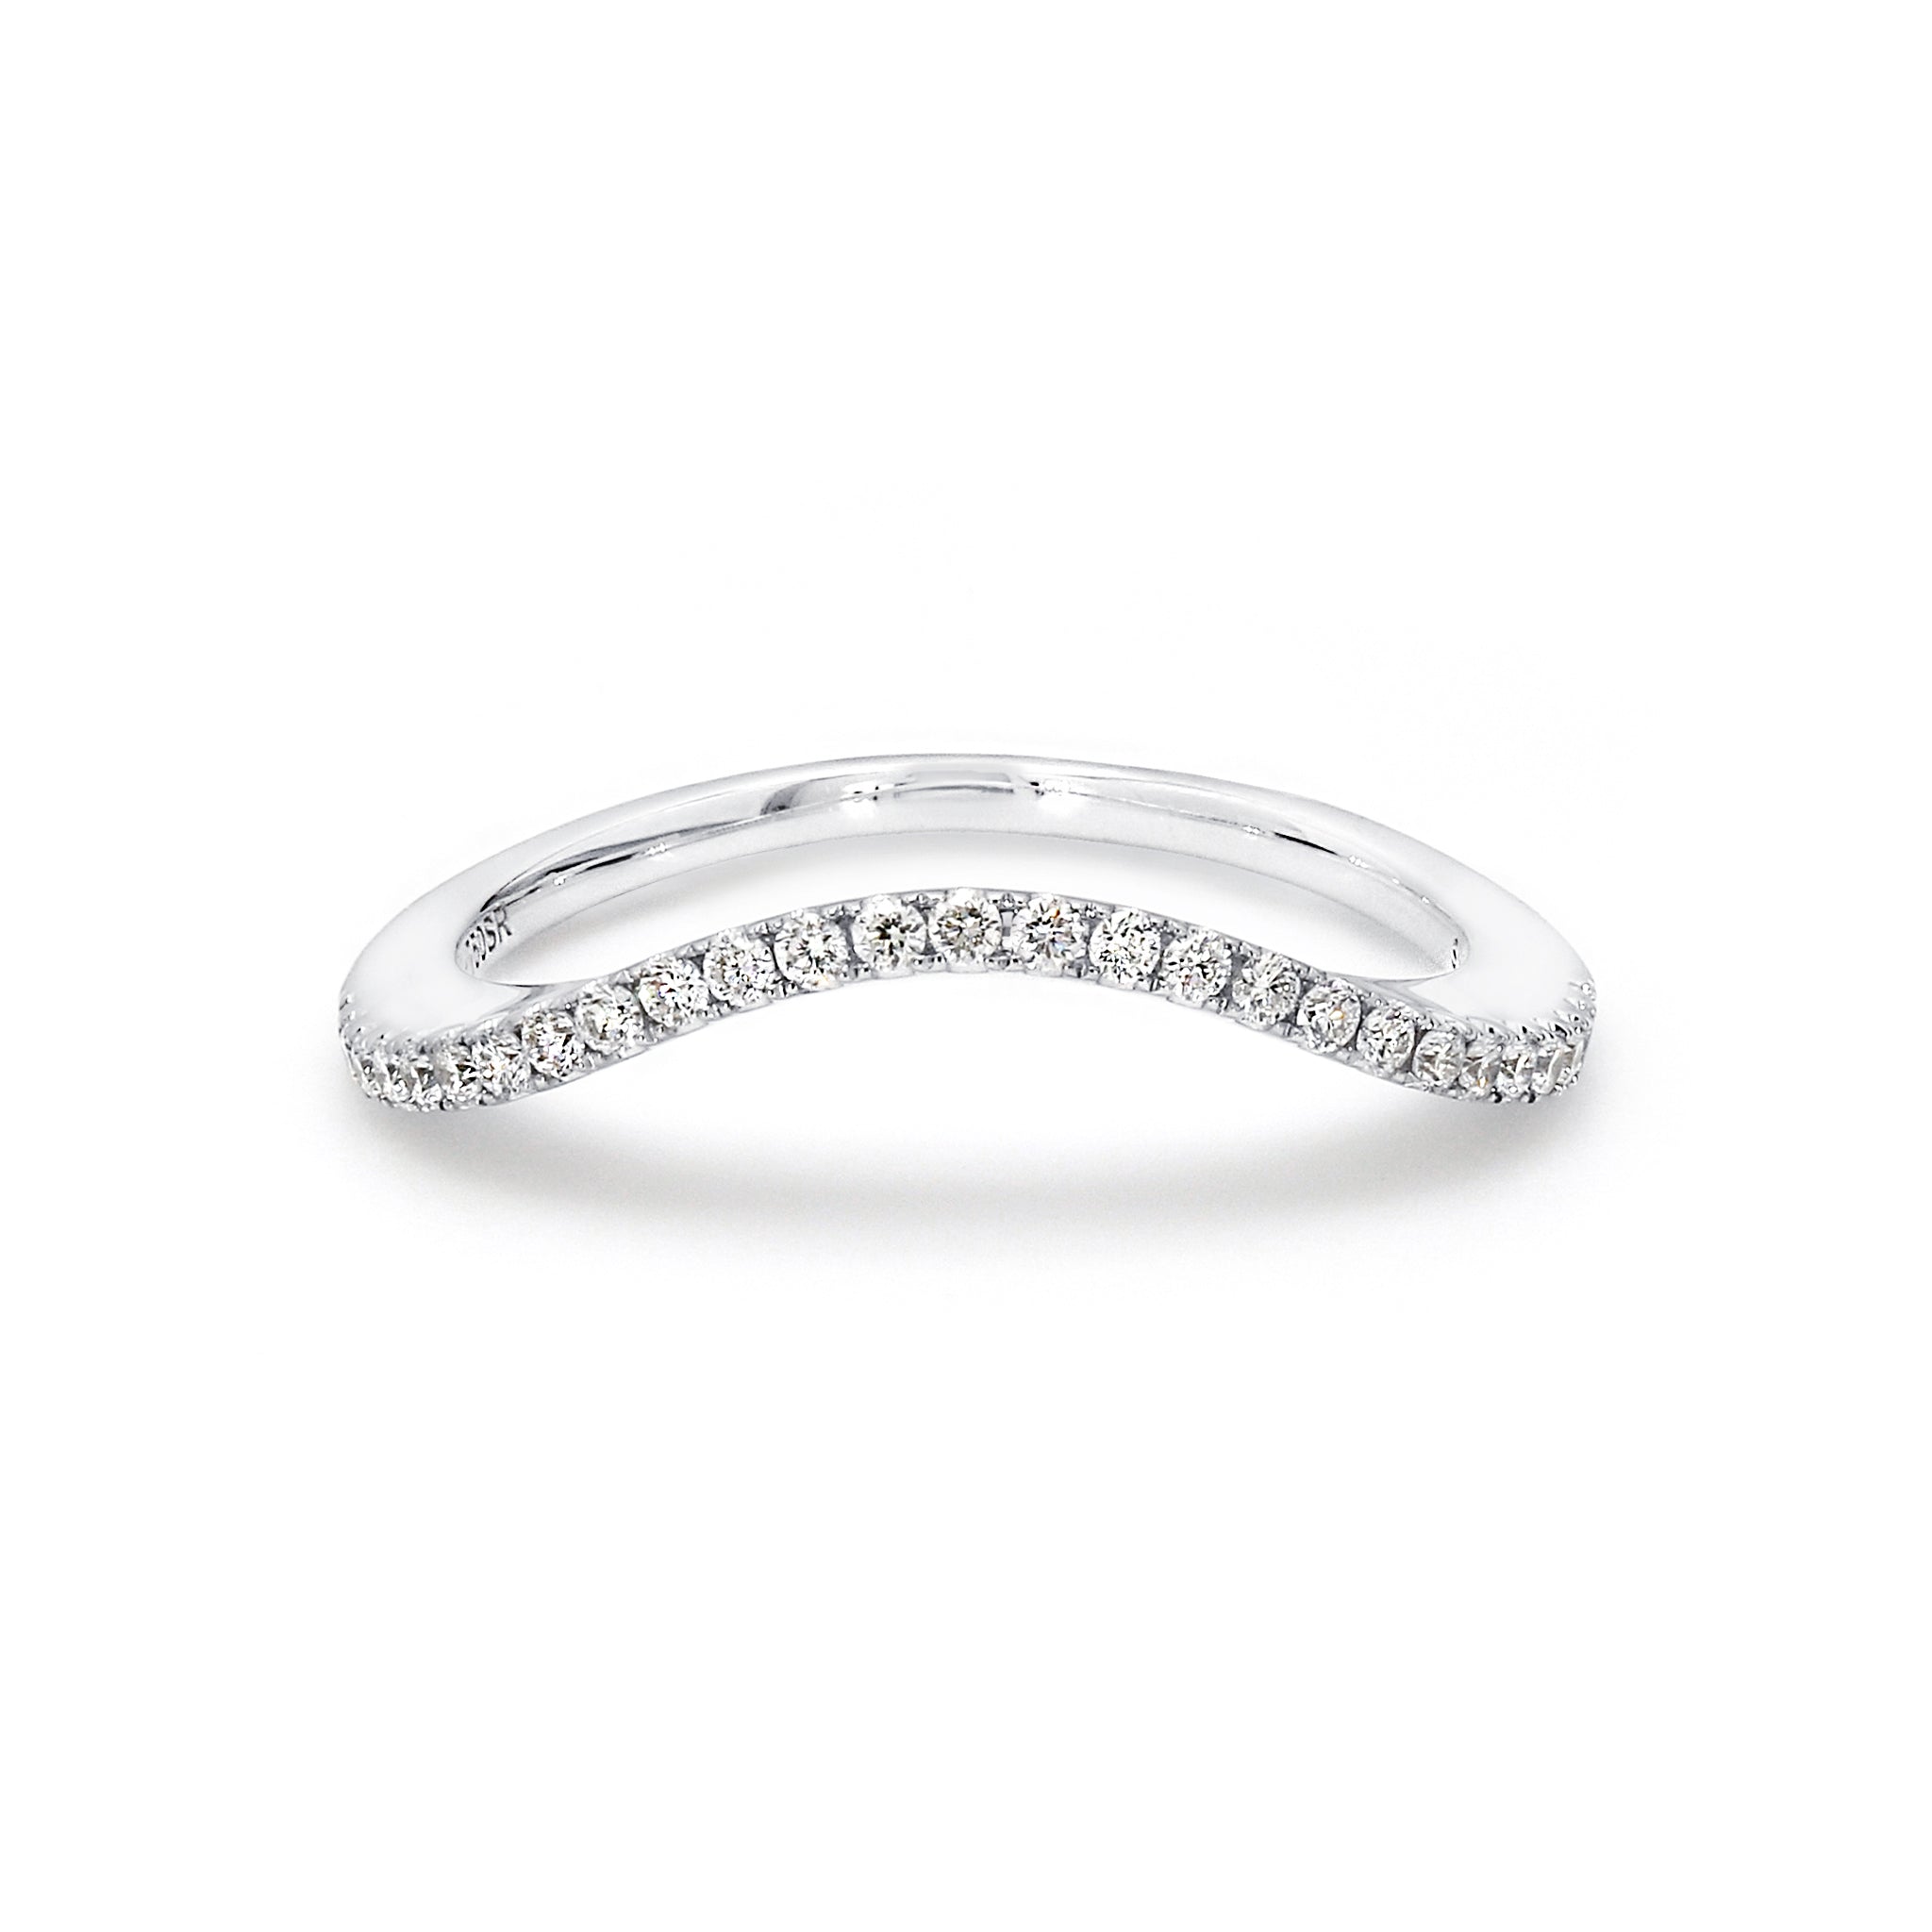 Shimansky - Silhouette Diamond Microset Wedding Band crafted in 18K White Gold